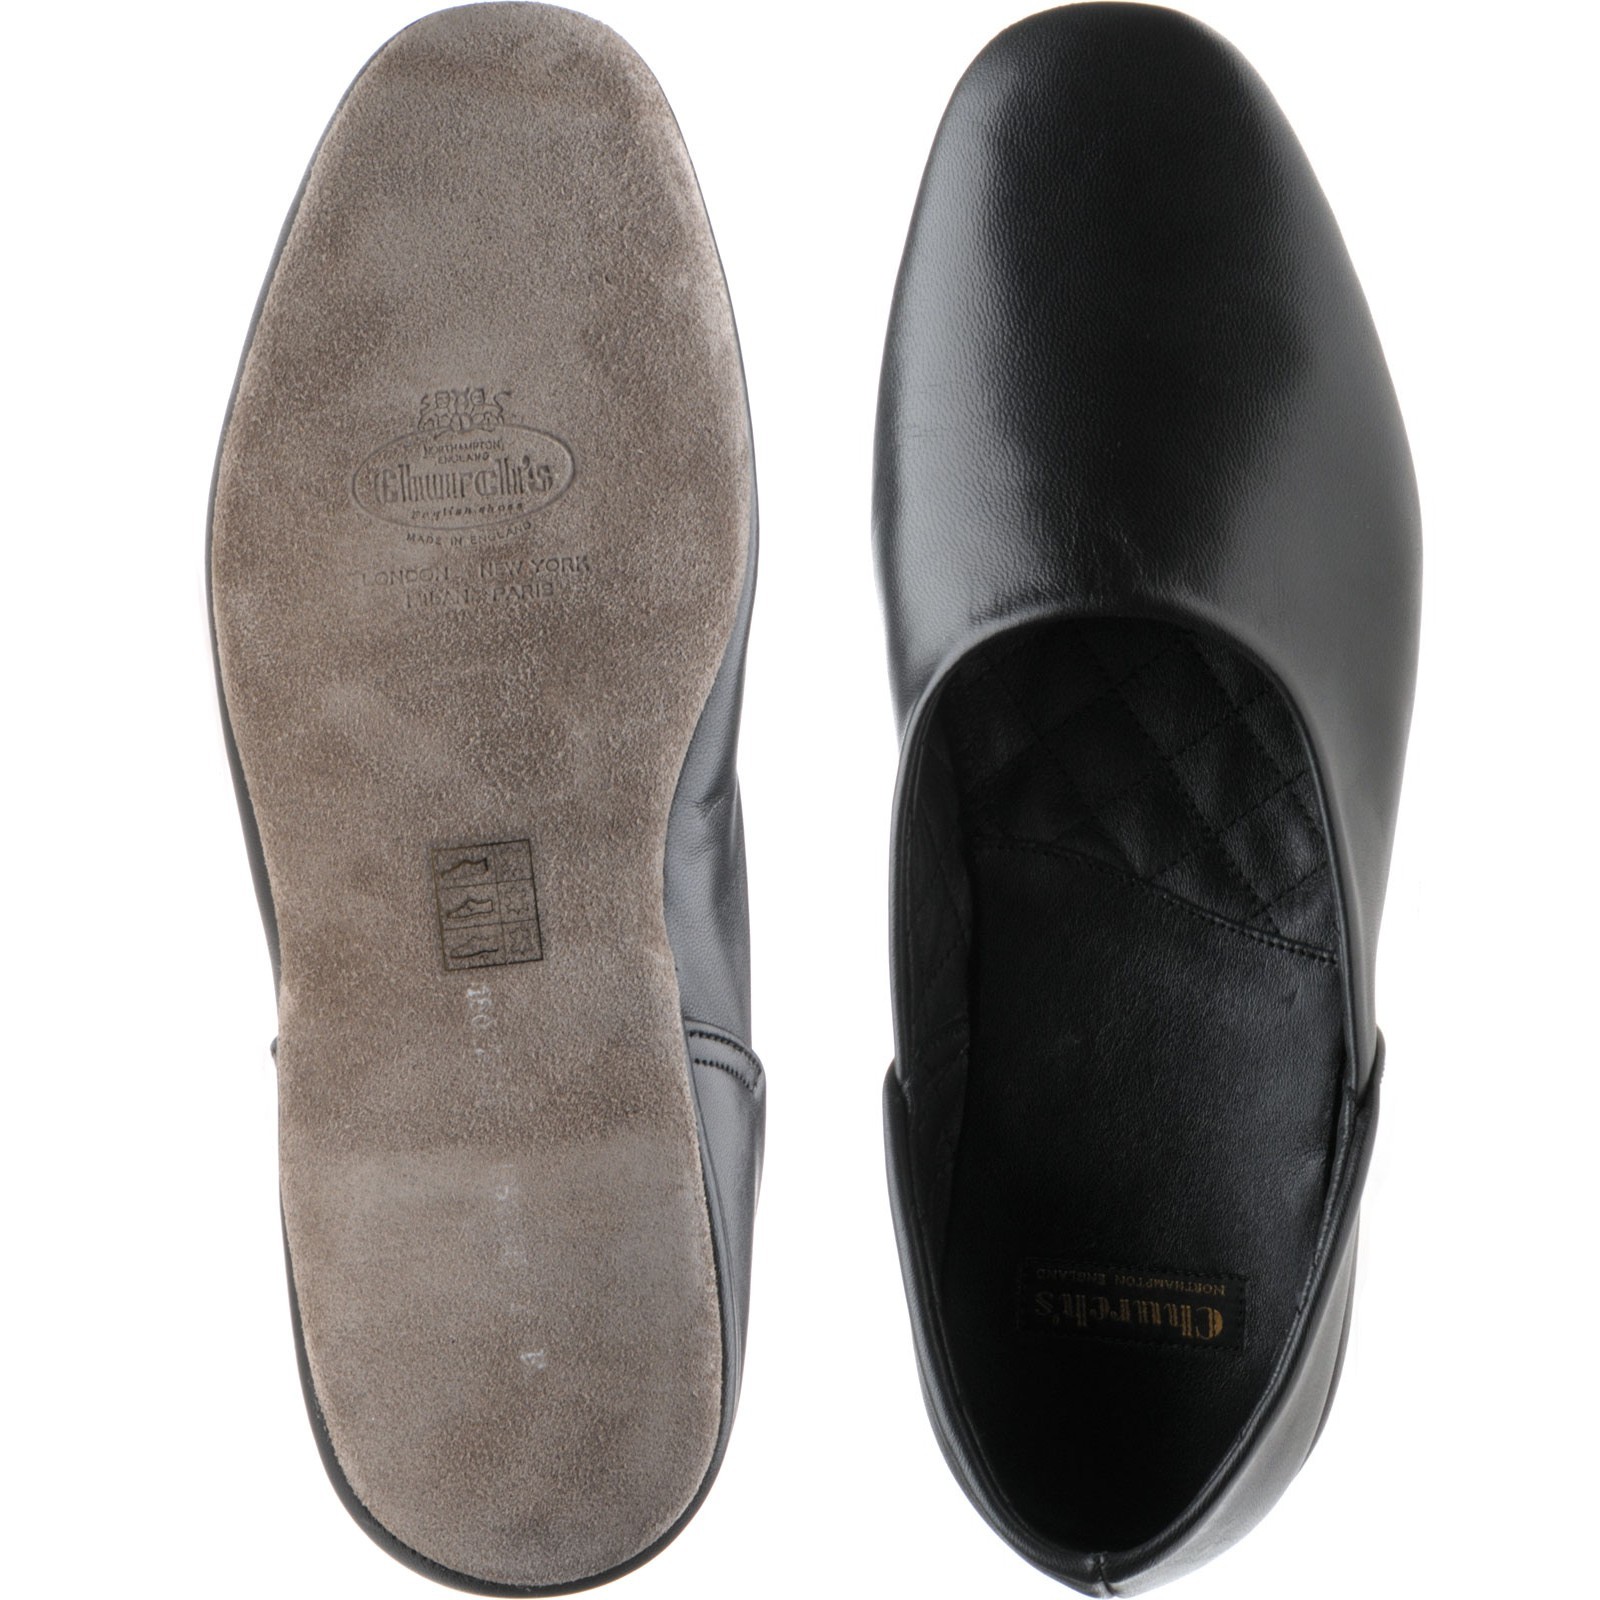 Church shoes | Church Slippers | Jason slippers in Black Nappa at ...